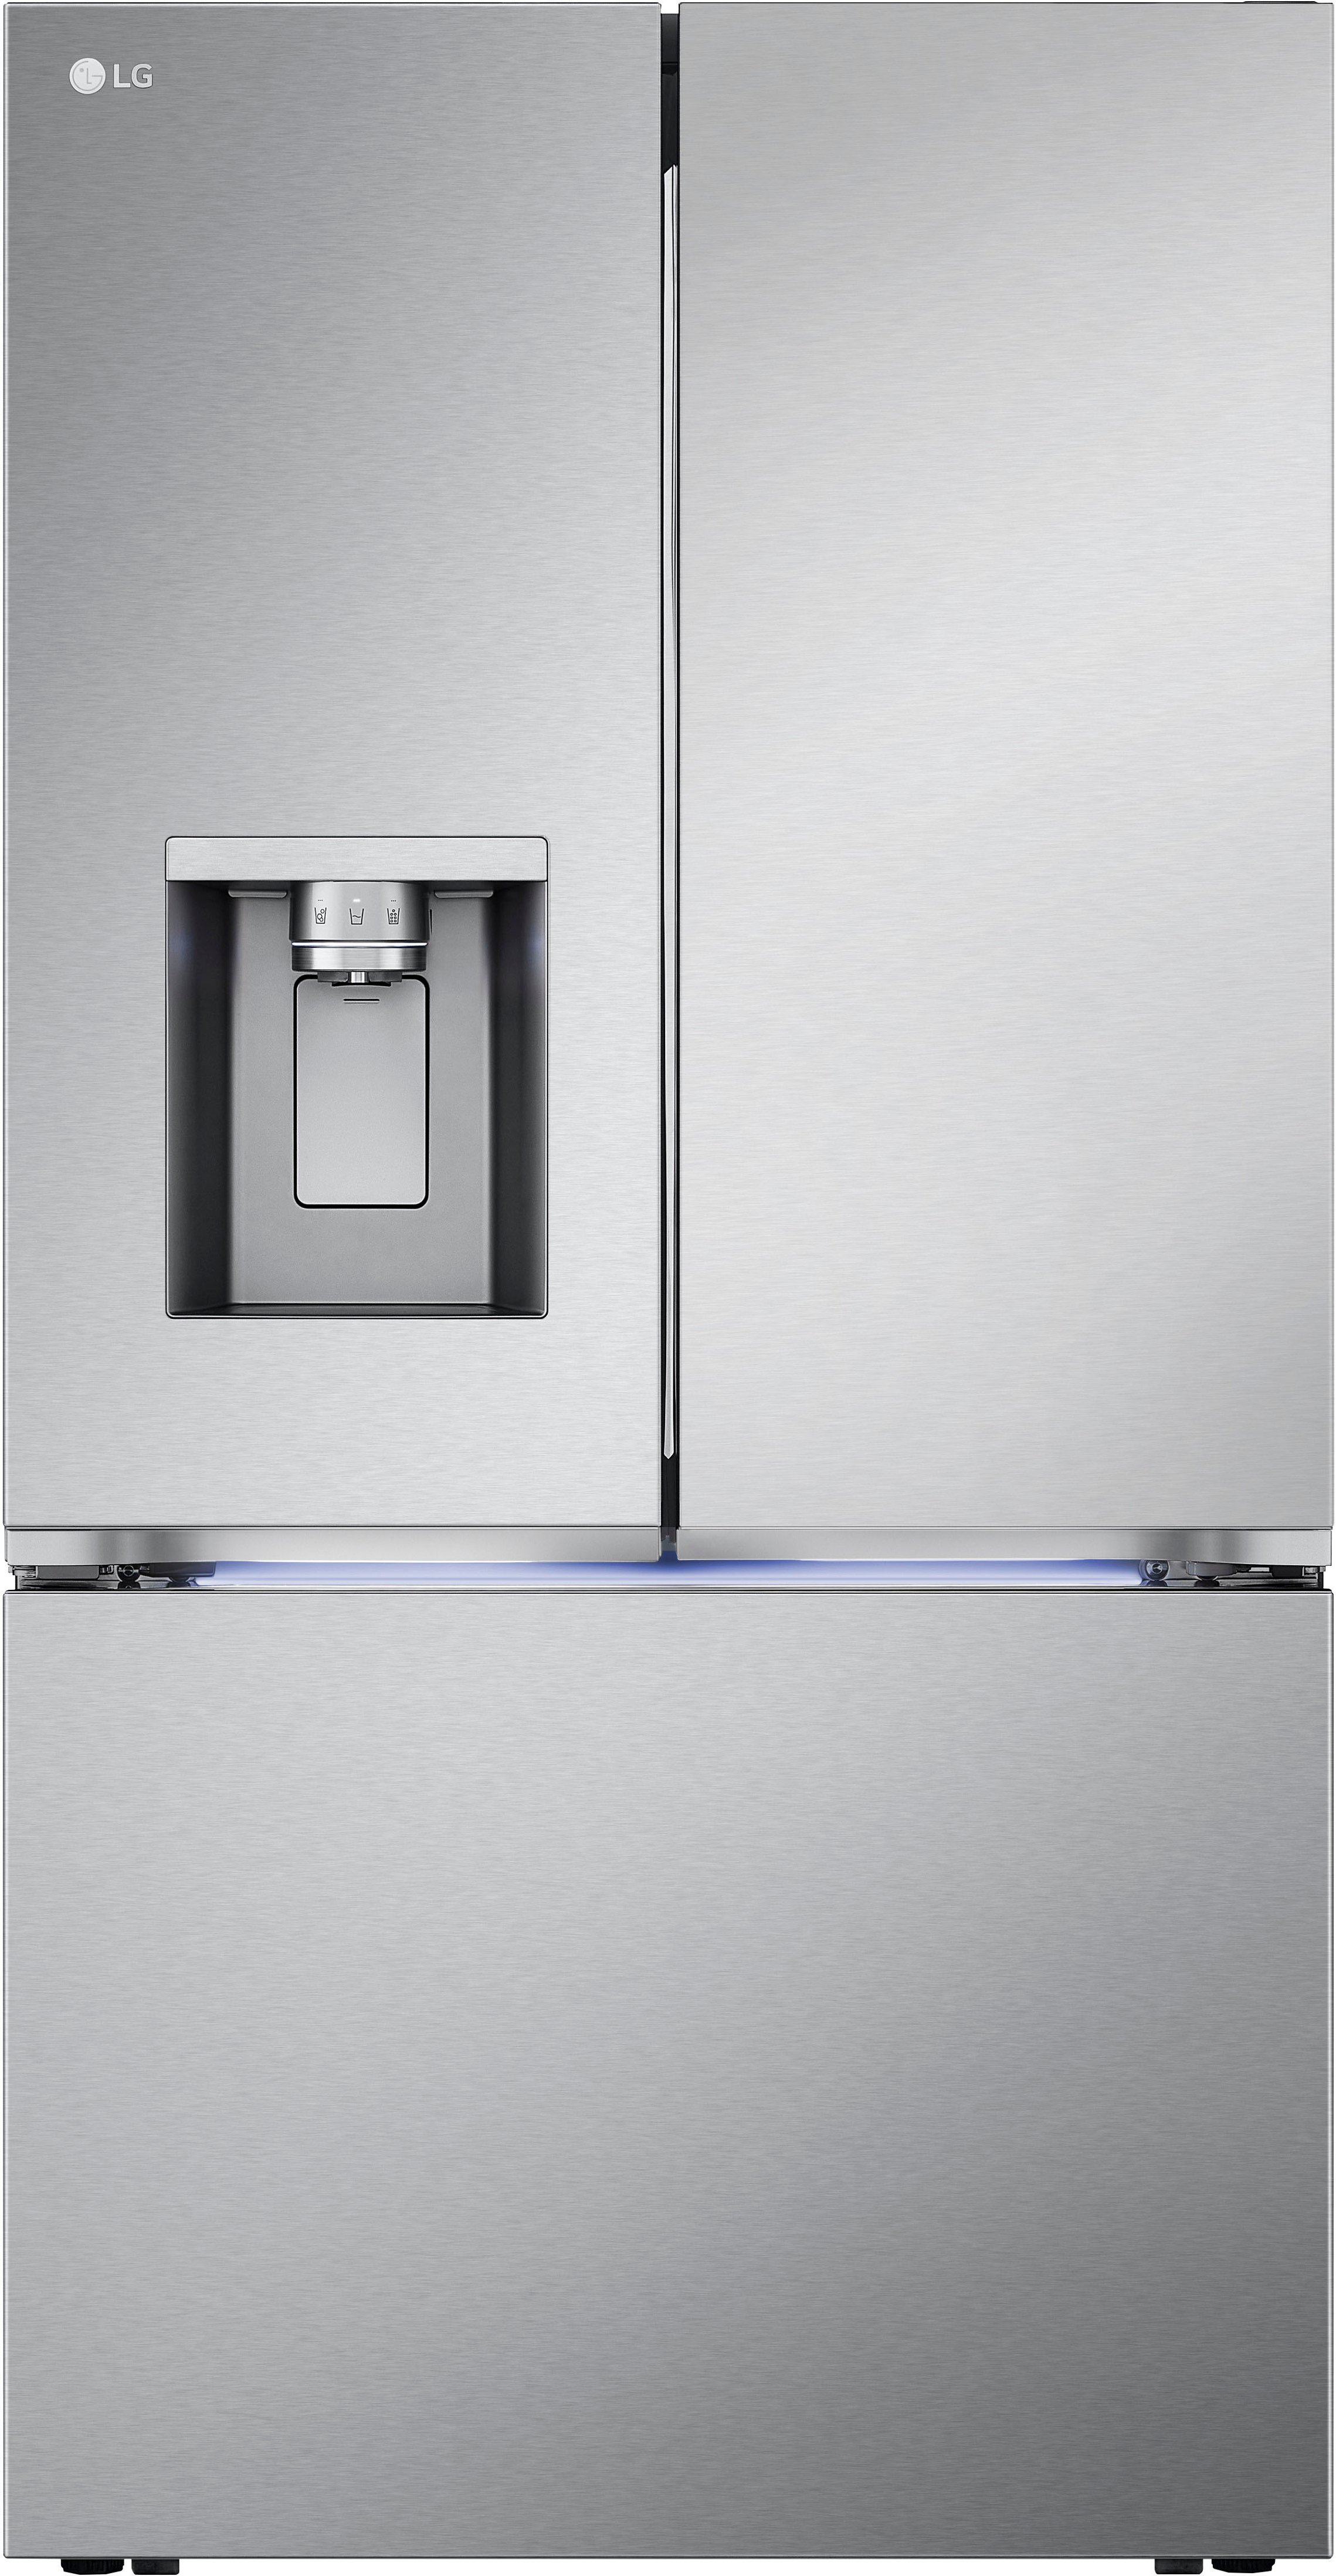 LG Appliances 26 Cu. ft. Smart Counter-Depth Max French Door Refrigerator, Stainless Steel